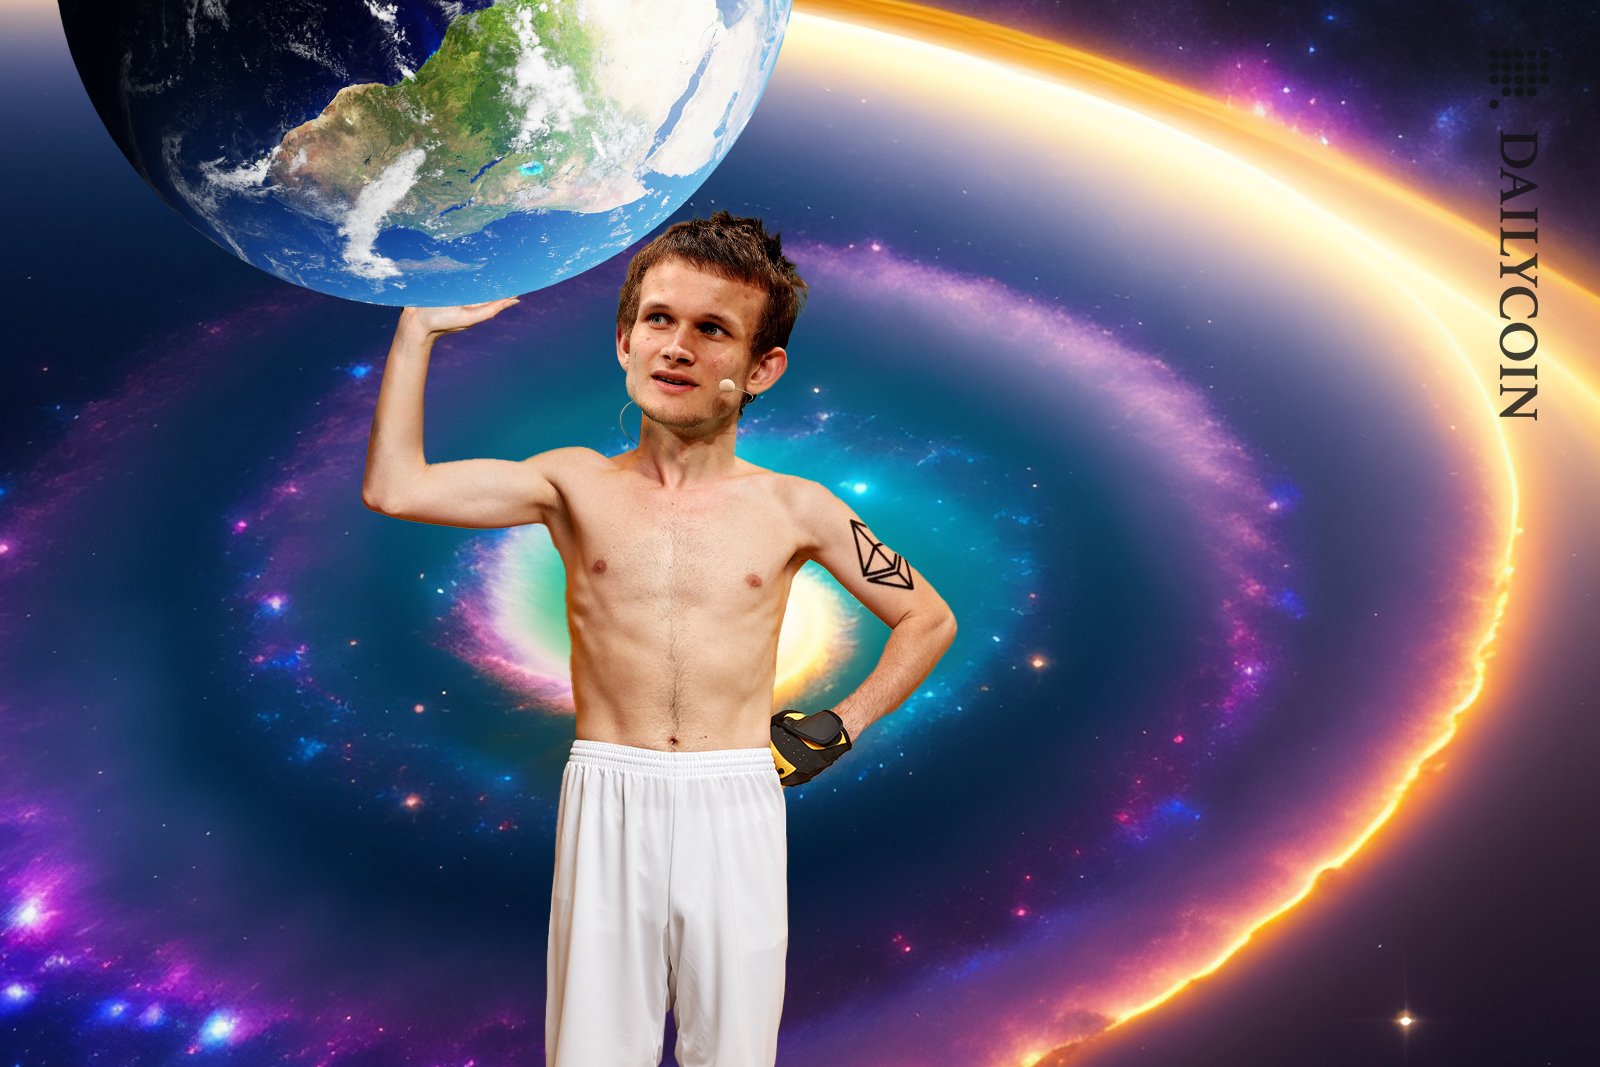 Vitalik Buterin holding the whole world with one hand in his workout gear.